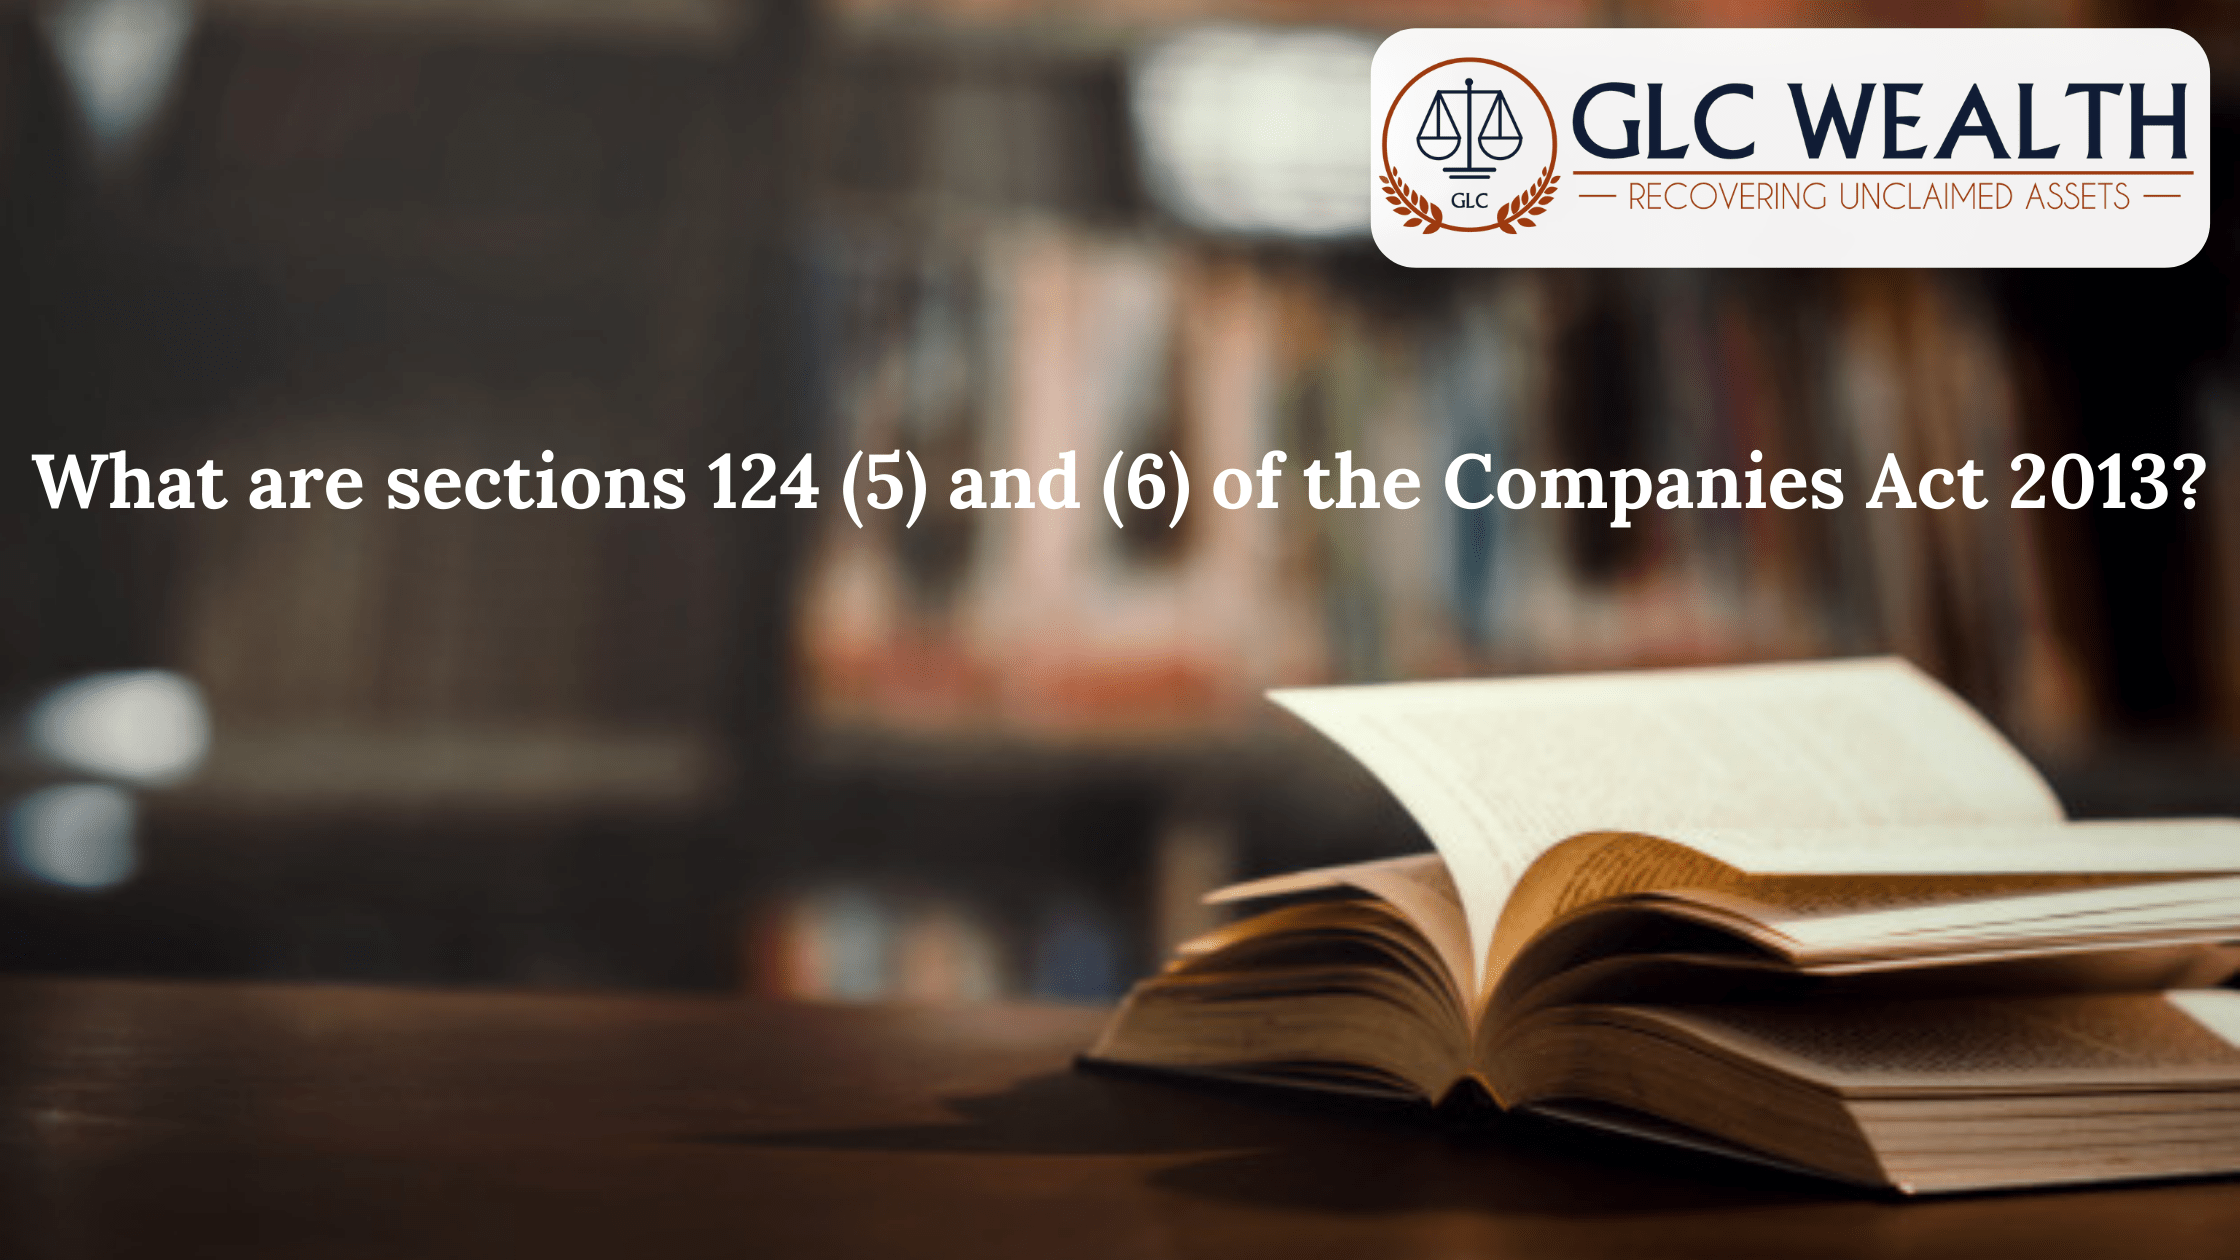 What are Section 124 (5) and (6) of The Companies Act 2013?